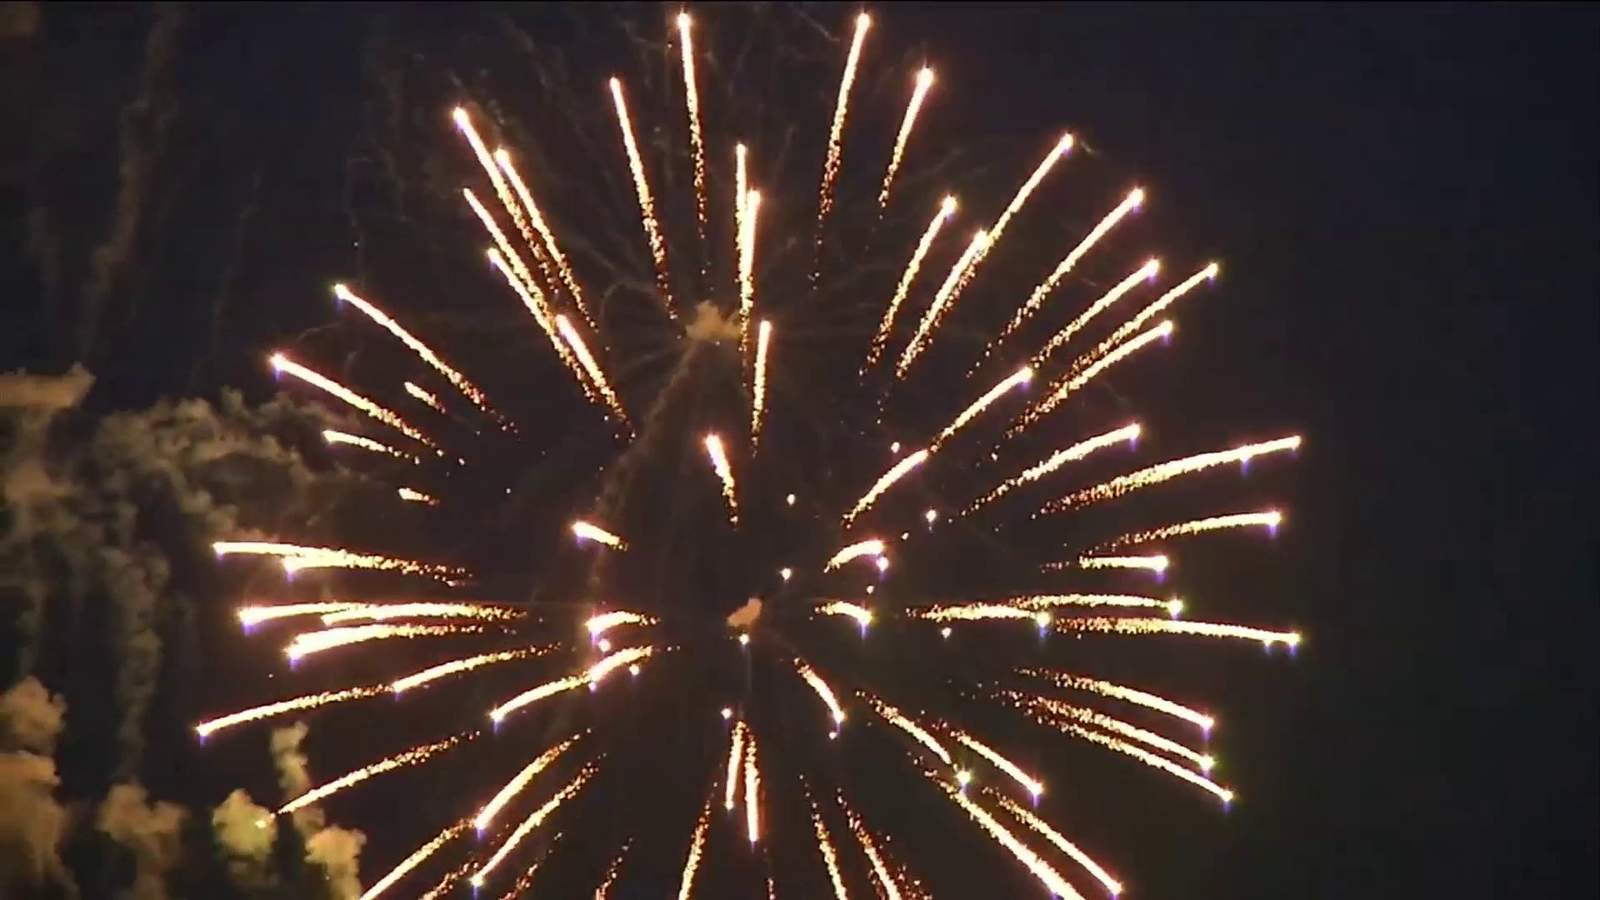 Jacksonville Beach officials decide to postpone 4th of July fireworks